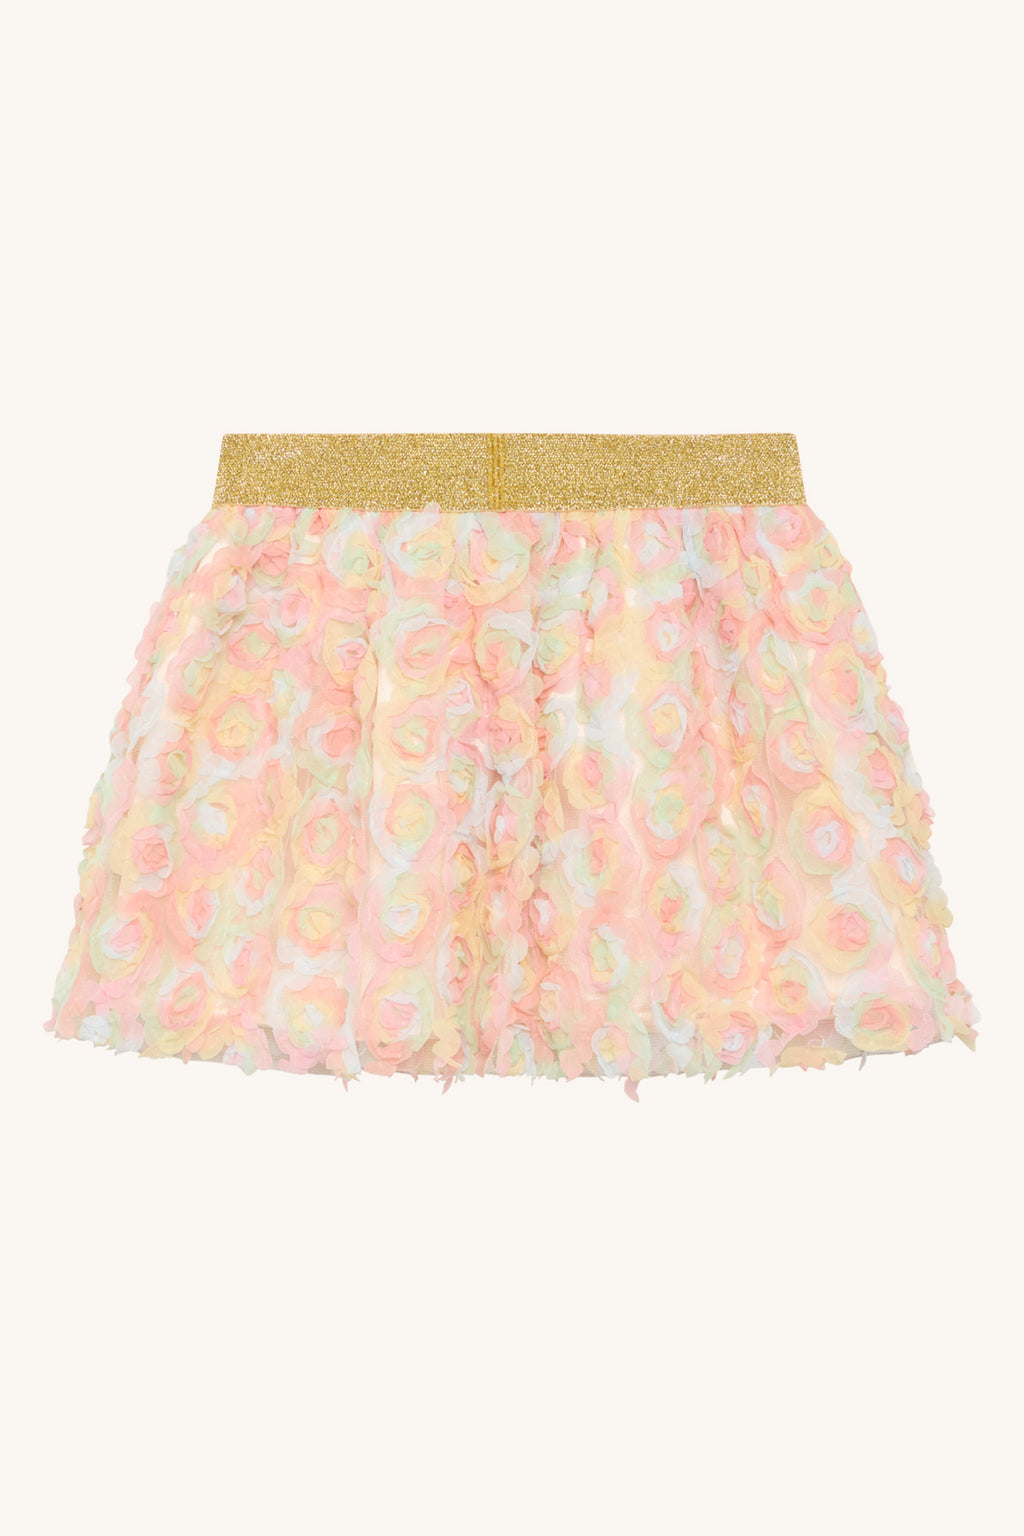 Hust and Claire Nena Skirt